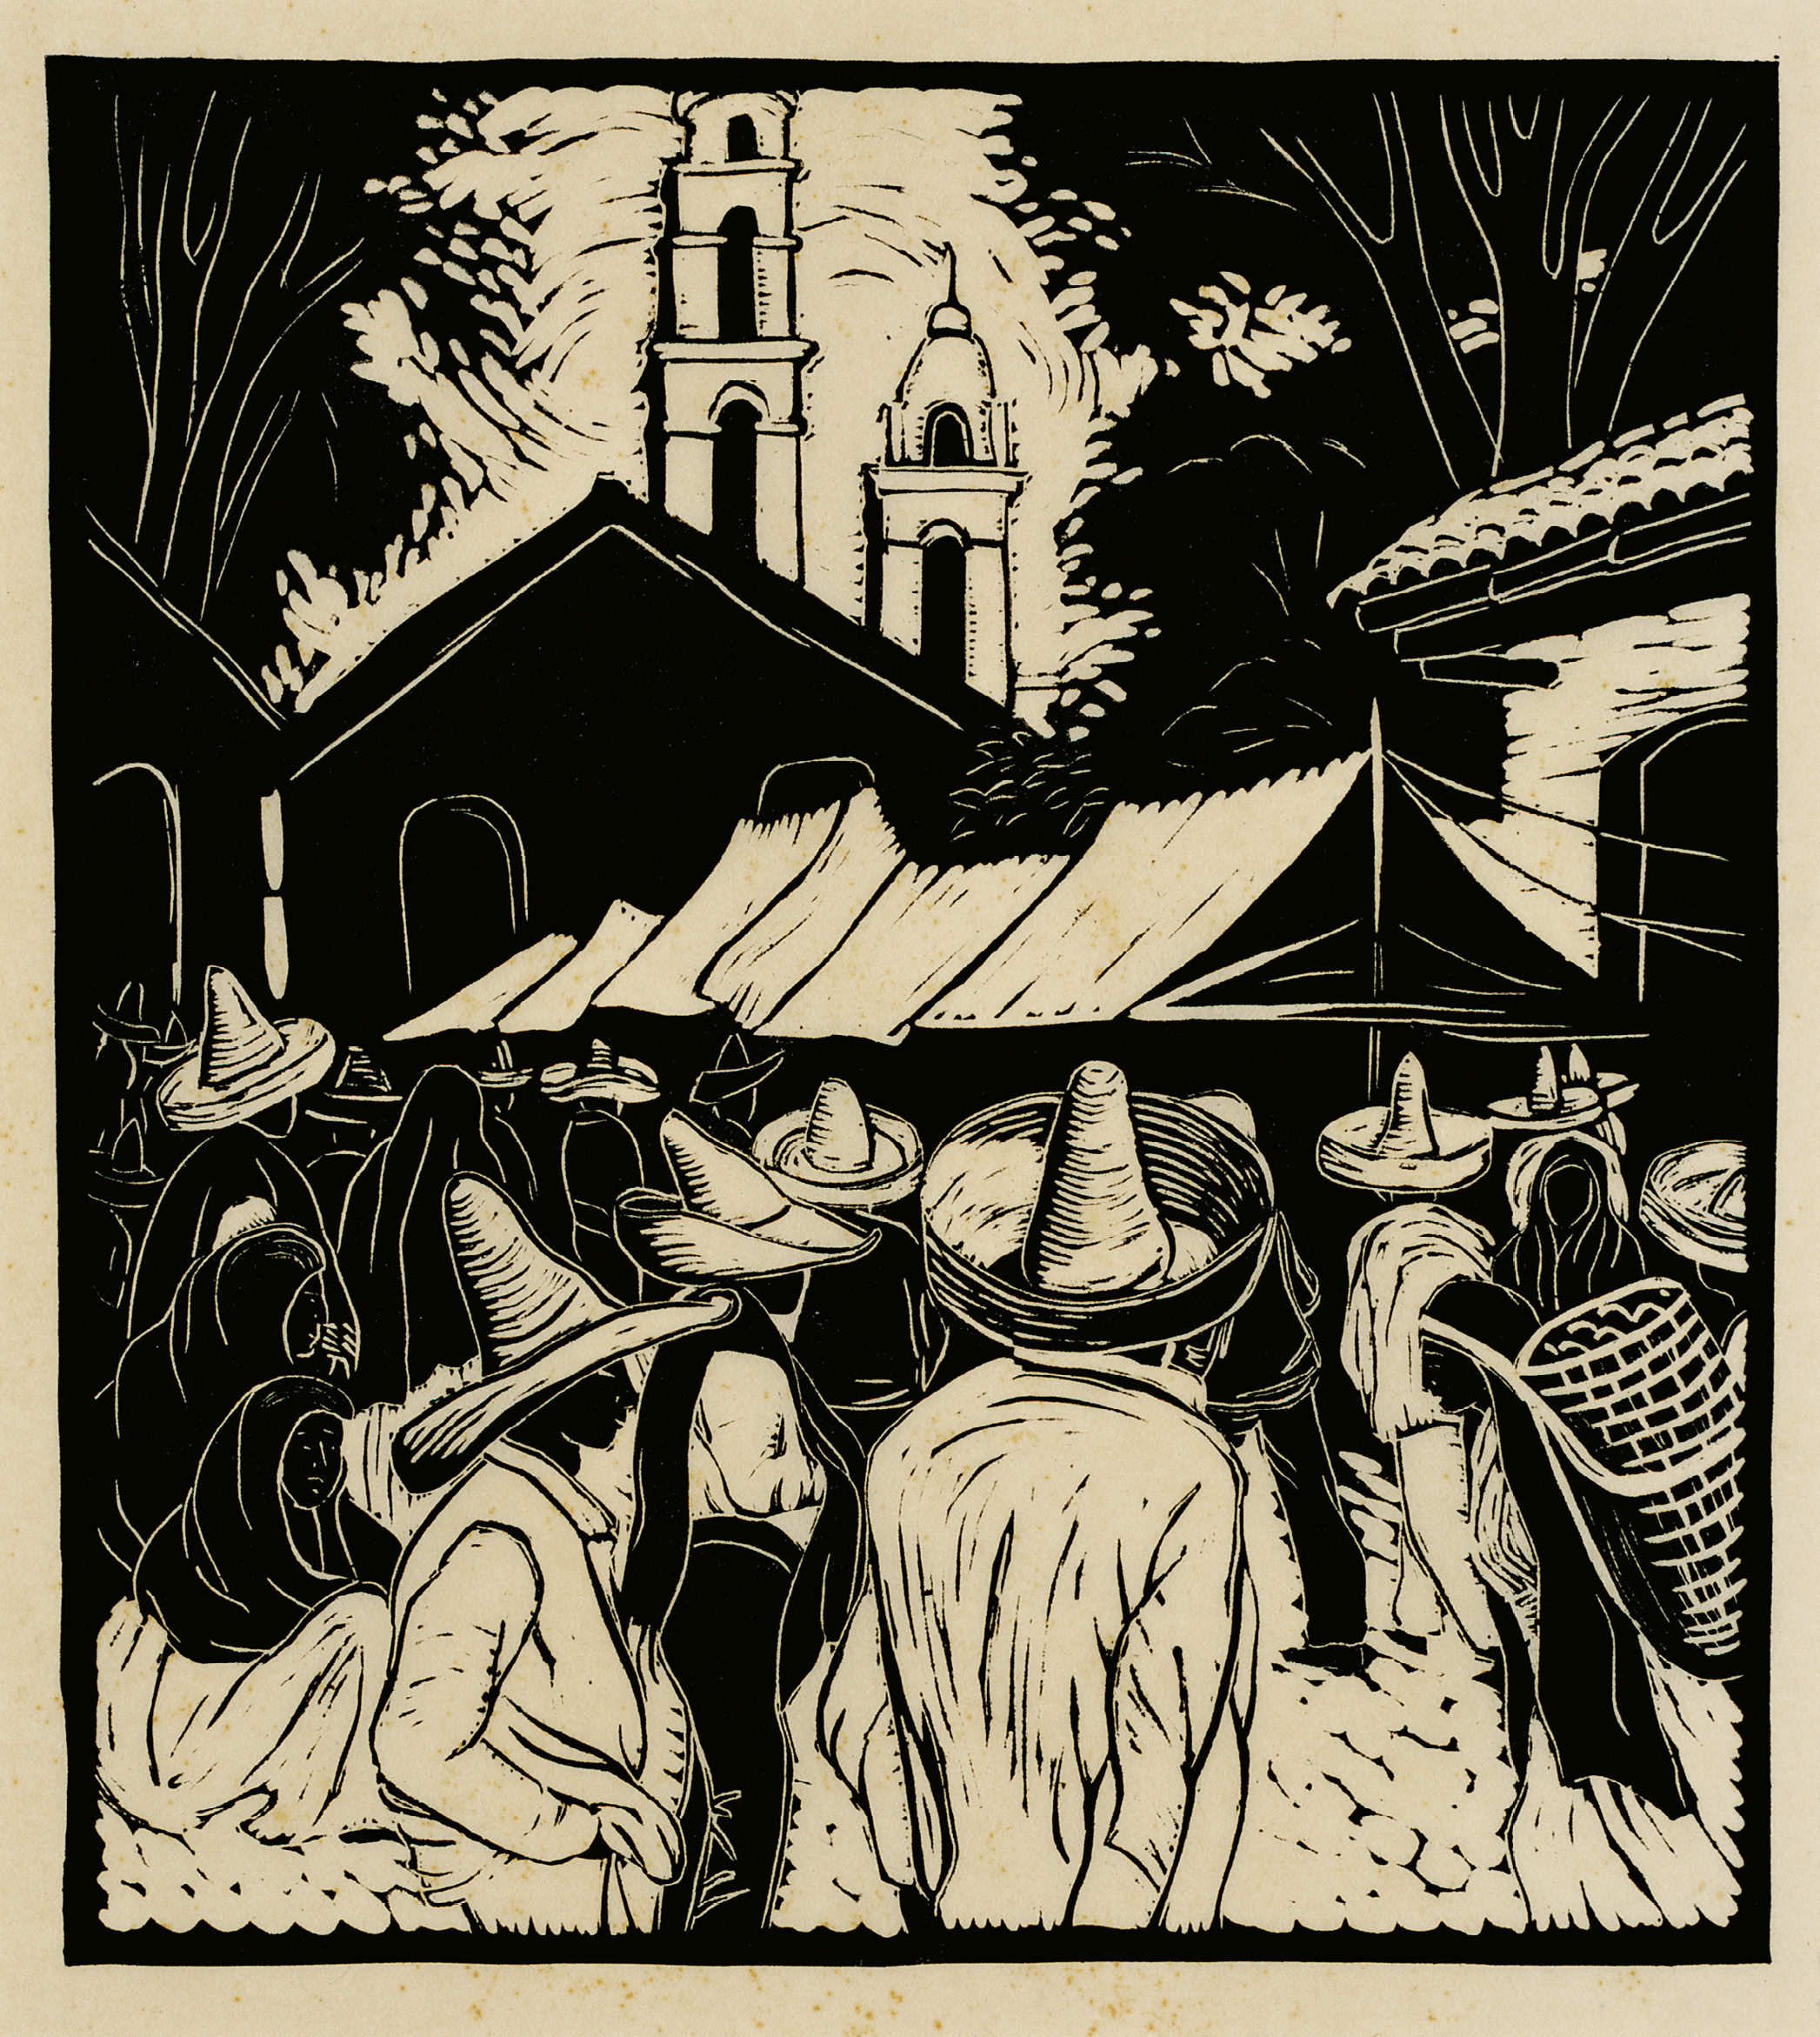 The artist traveled throughout Mexico from June 1935 to September 1936, capturing the culture and day-to-day lives of its residents in pieces, such as this “white line” woodblock print, Mexican Marketplace (circa 1935).